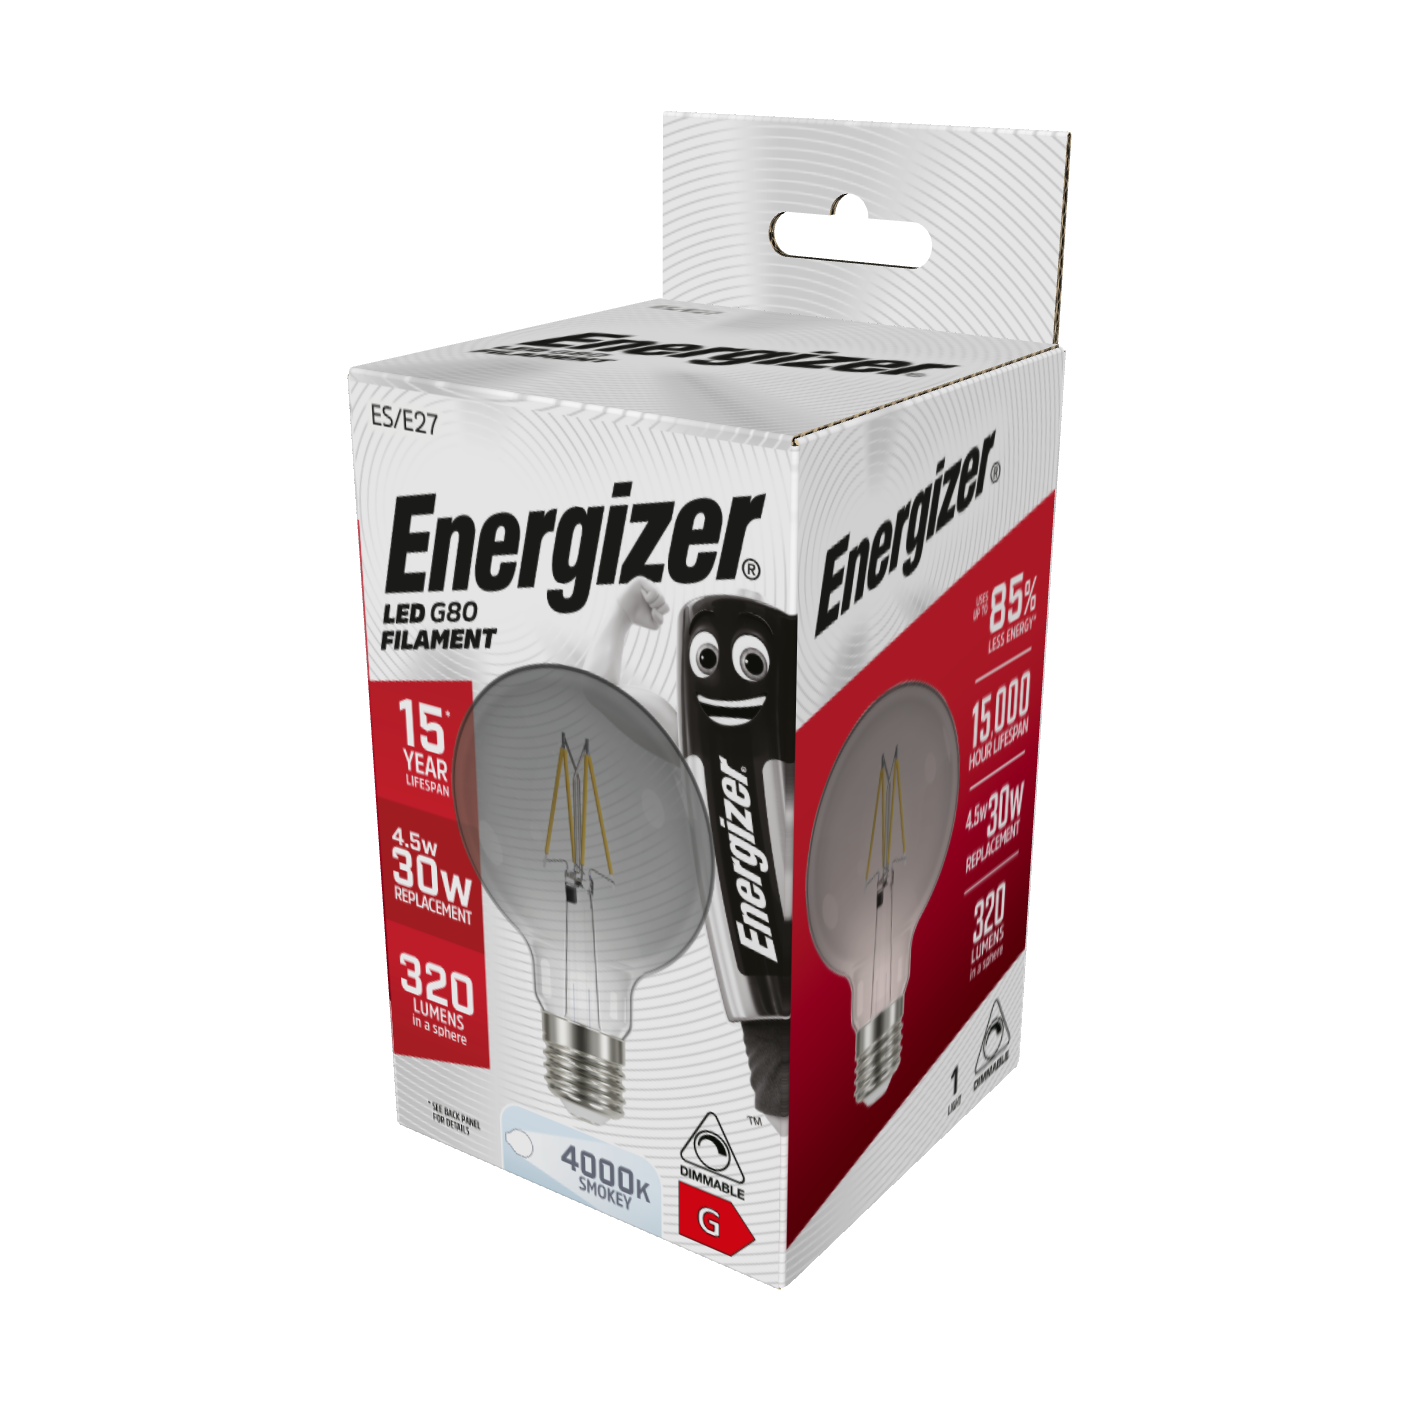 Energizer LED Filament G80 E27 (ES) Smokey 320lm 4.5W 4,000K (Cool White) Dimmable, Box of 1